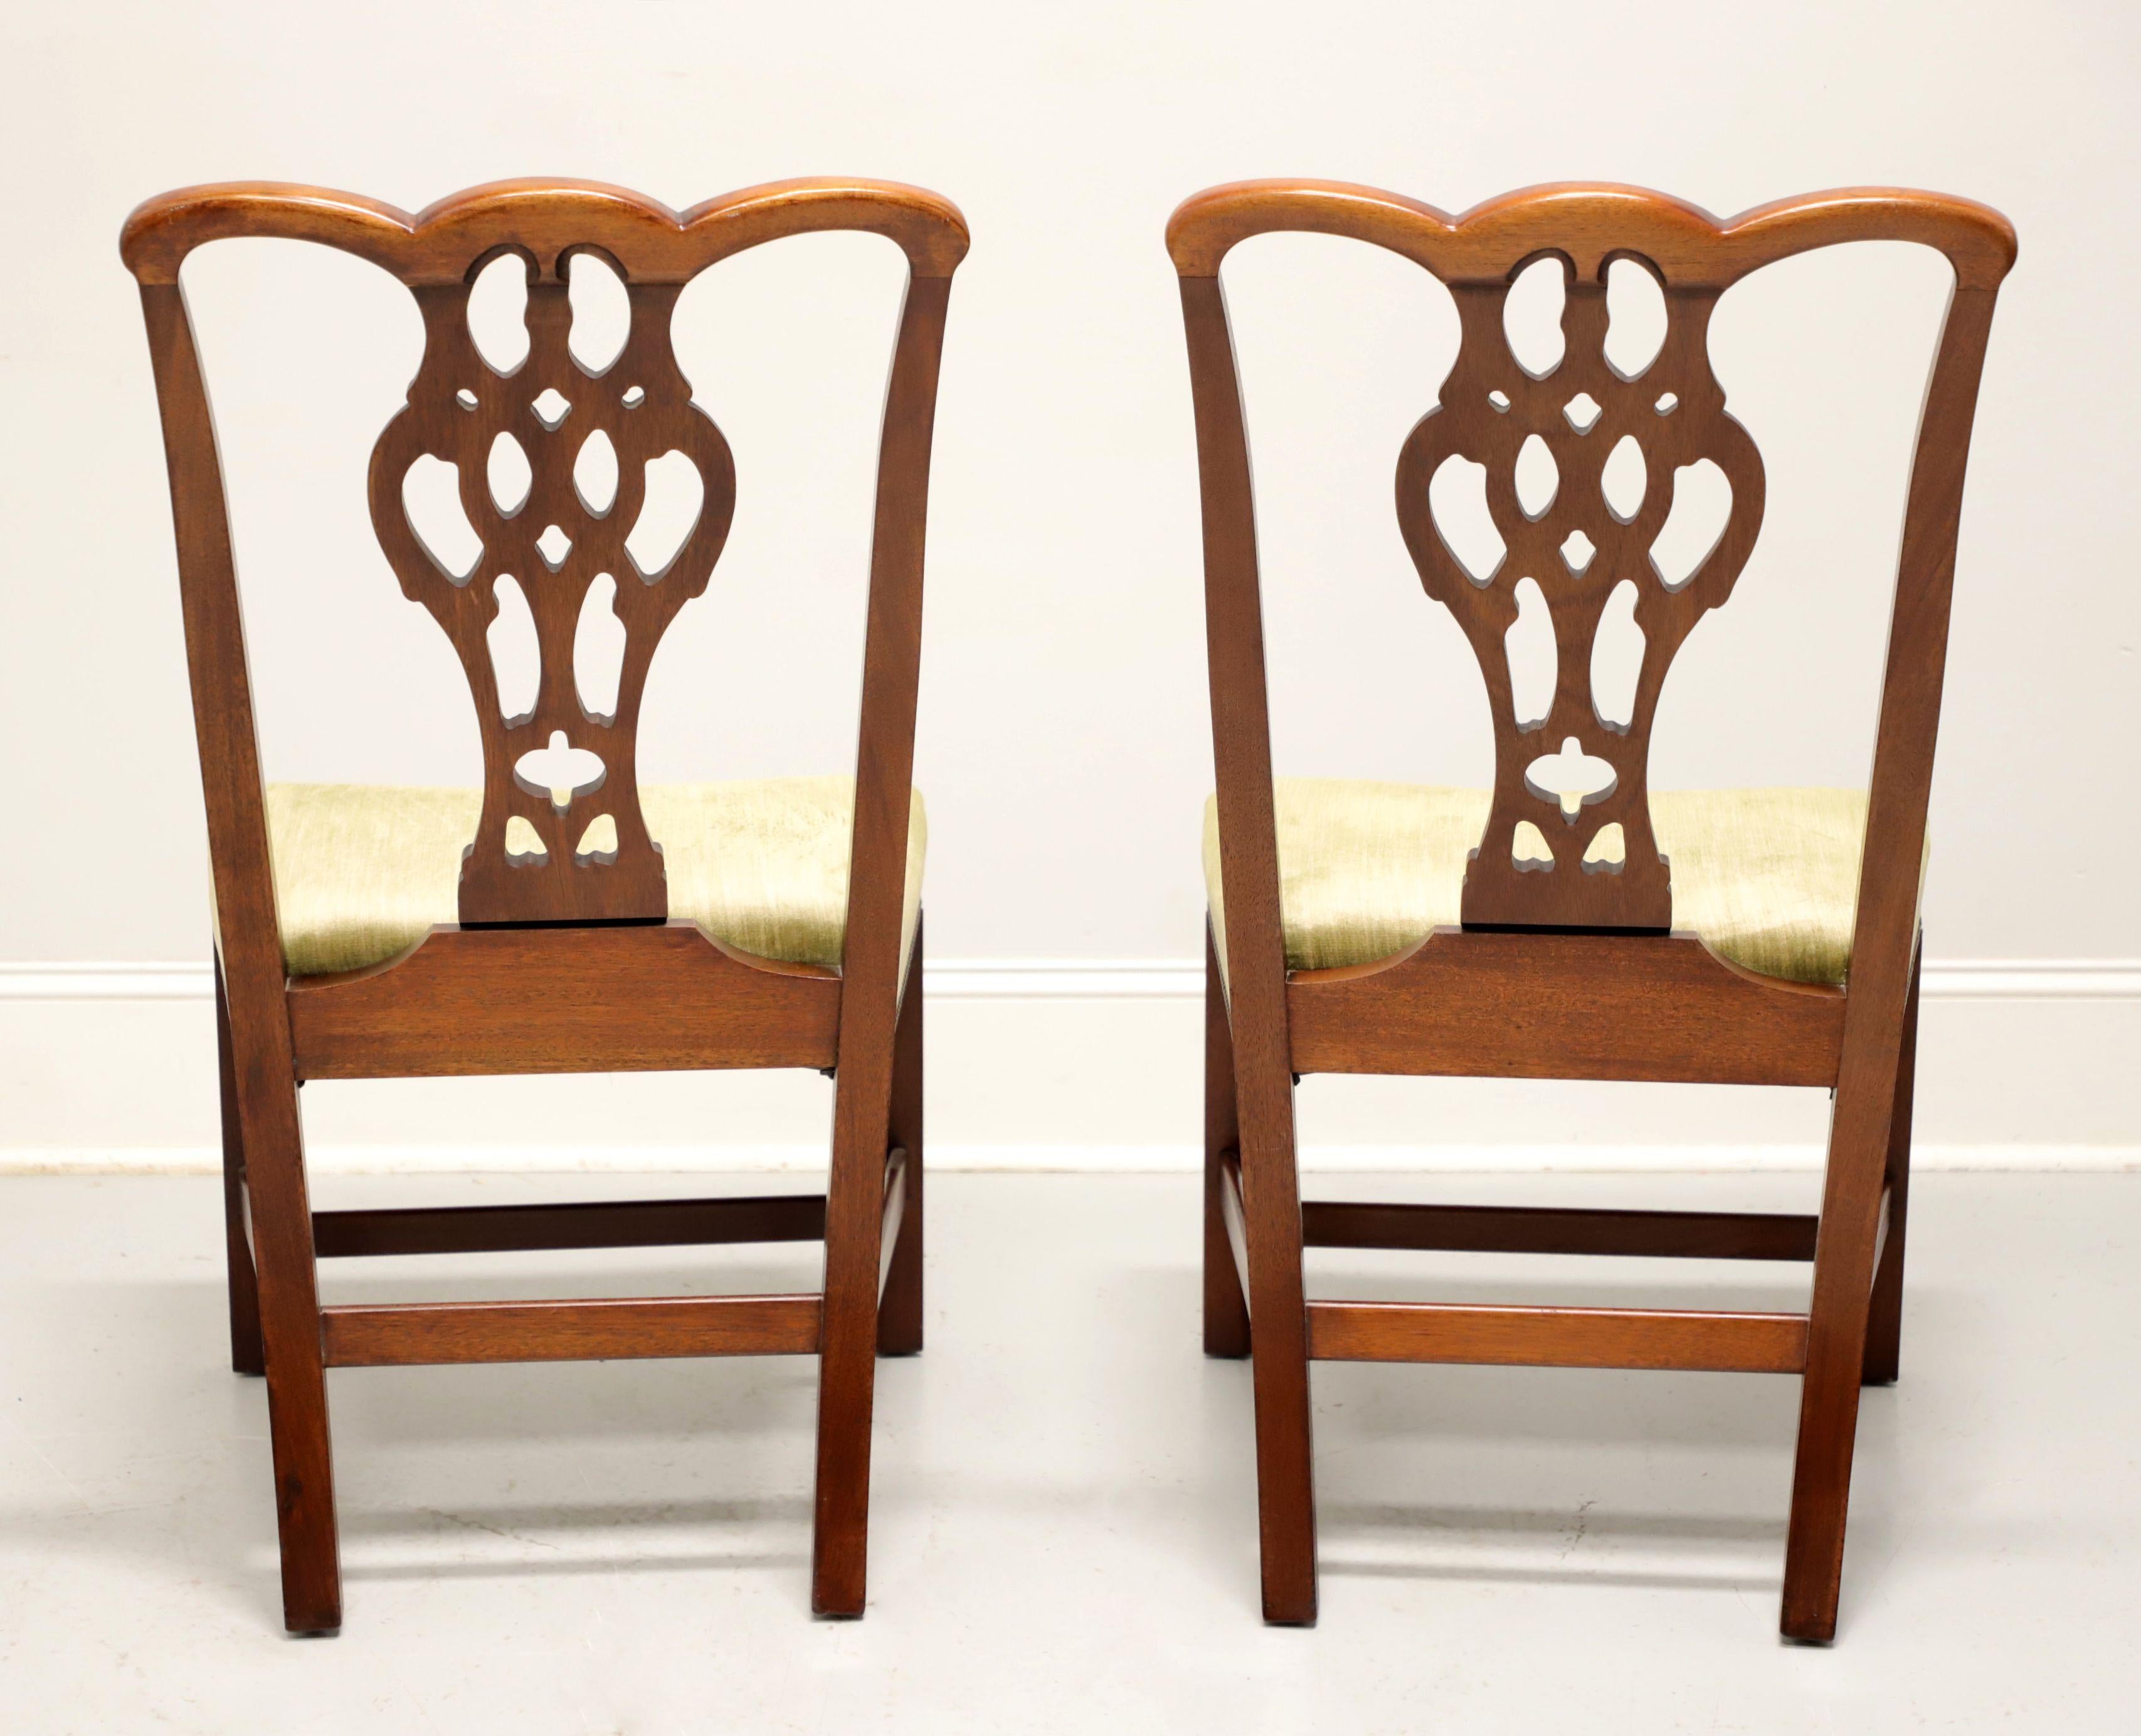 20th Century CRAFTIQUE Mahogany Chippendale Style Straight Leg Dining Side Chairs - Pair A